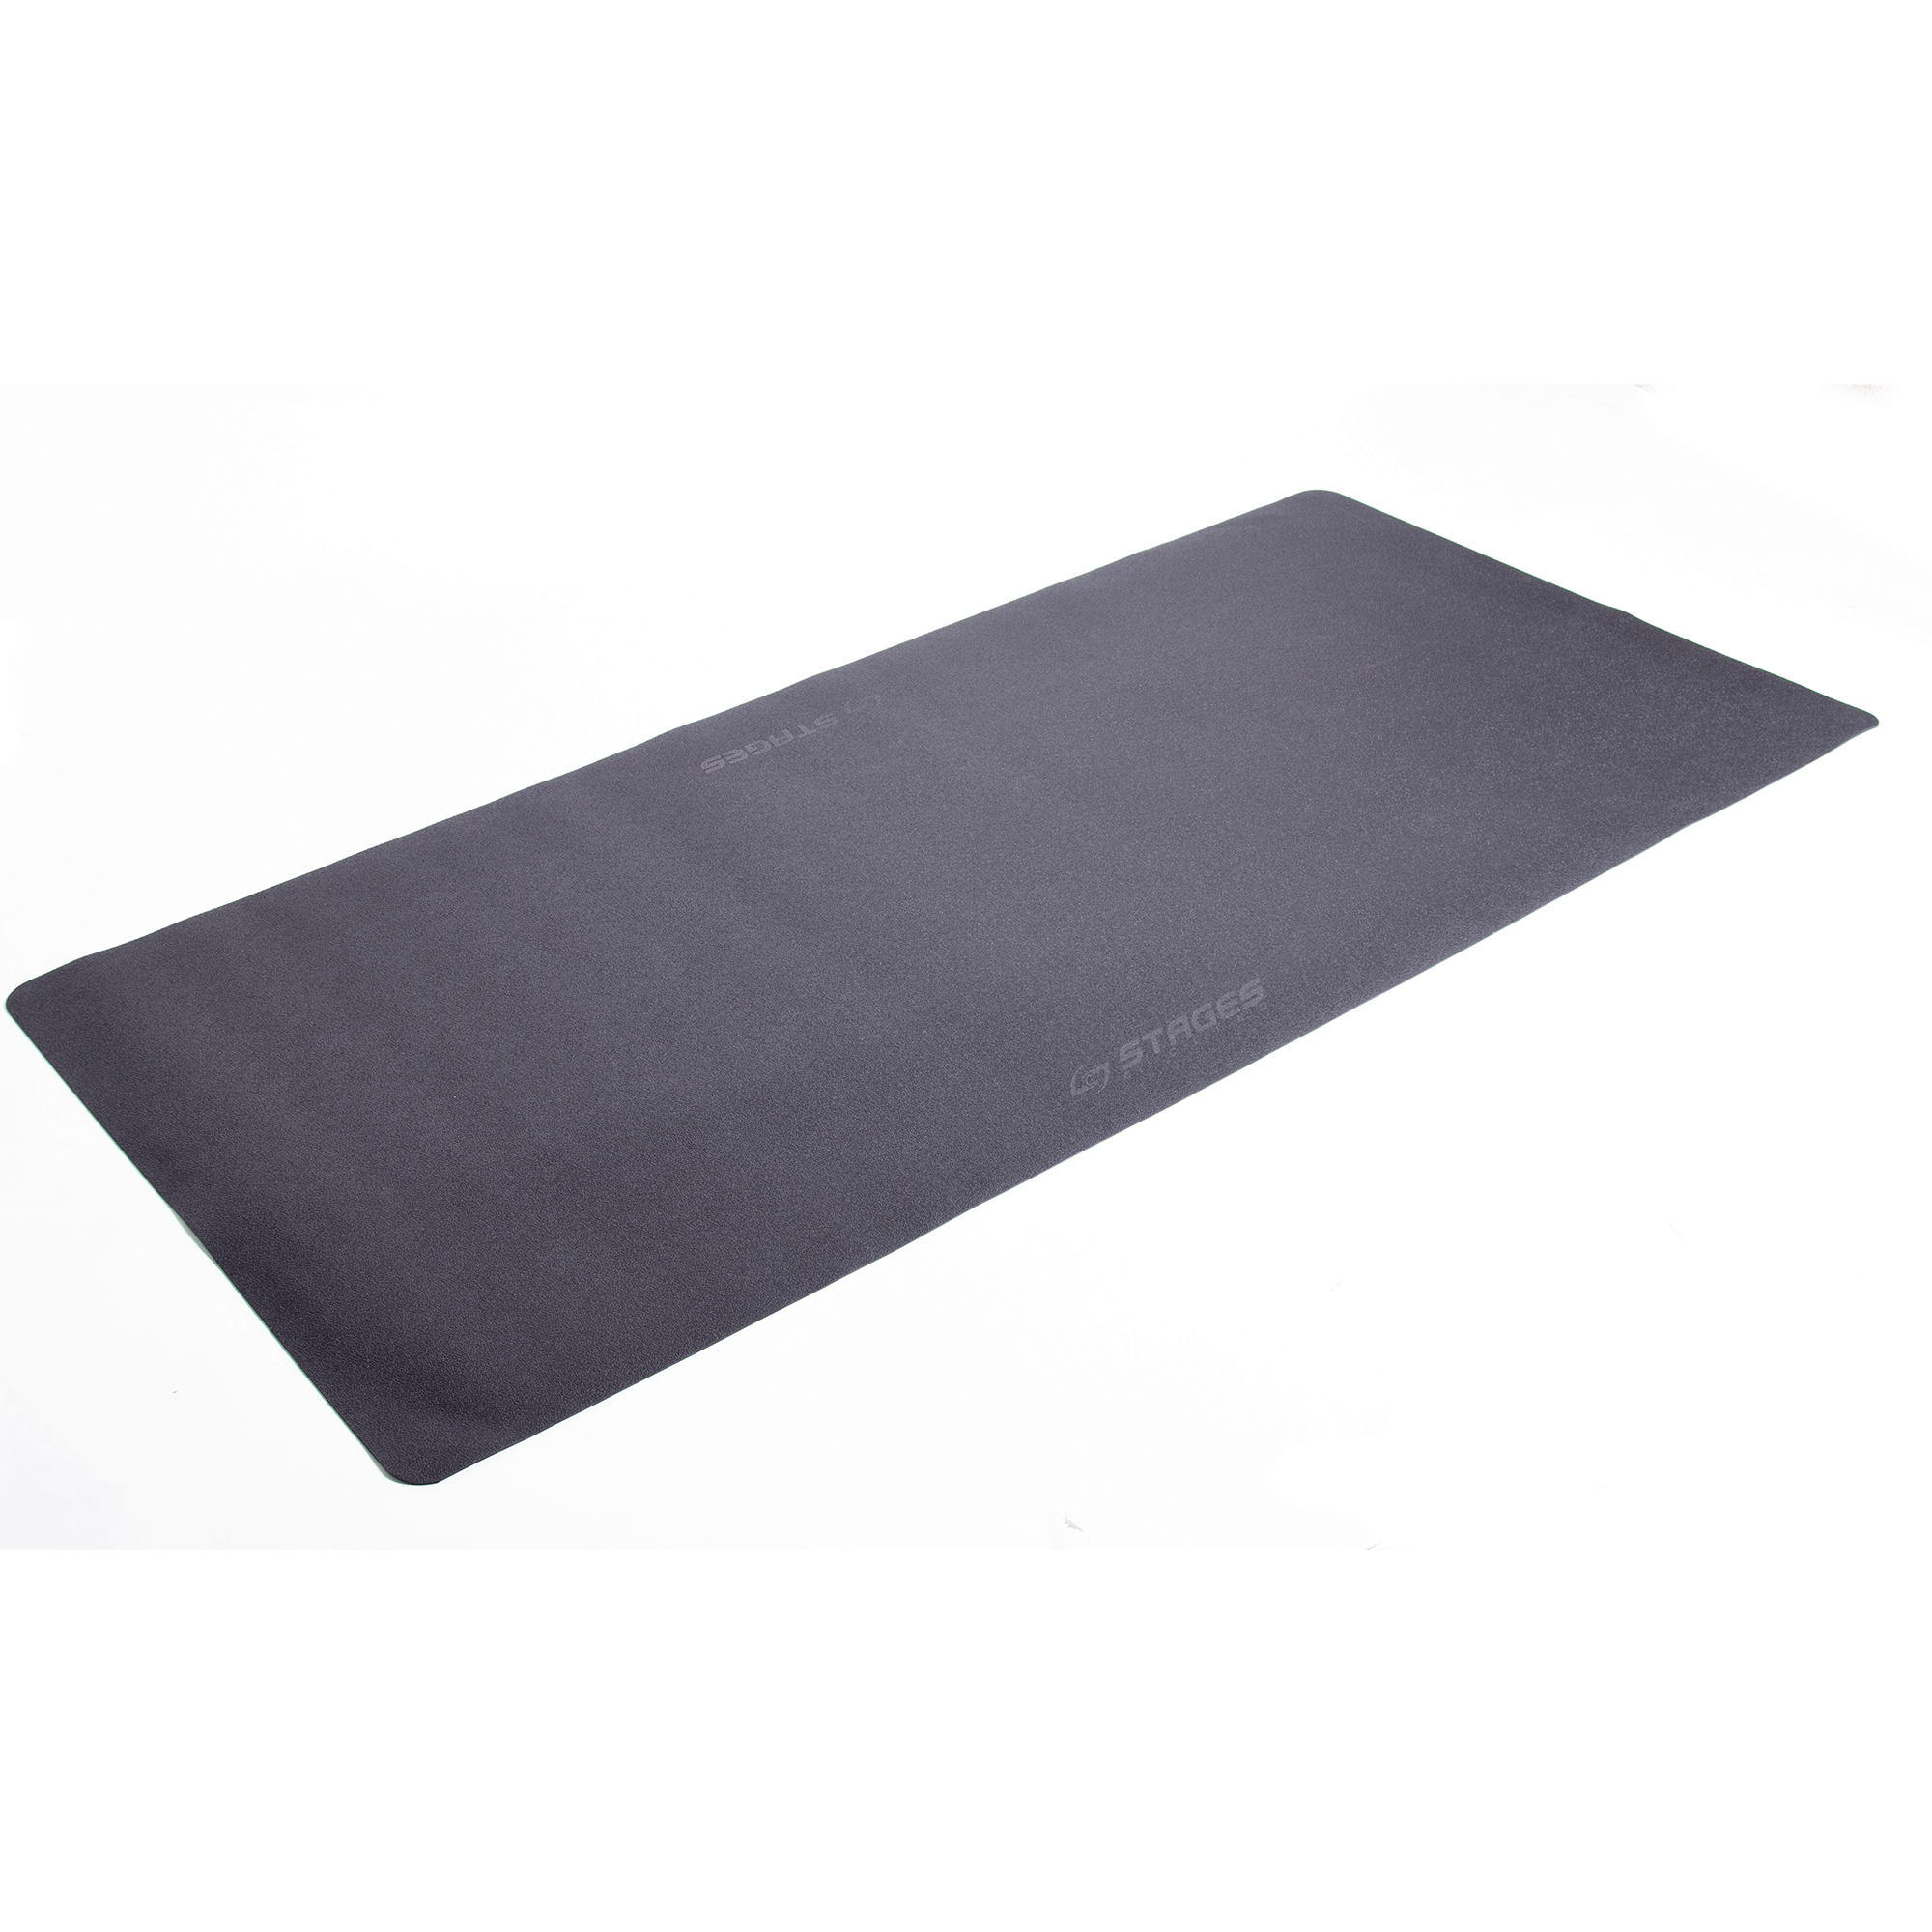 https://stagescycling.com/media/catalog/product/cache/91155480b8624bc7ab92d7fc1477f49b/s/t/stages-floormat-971-0137_side.png